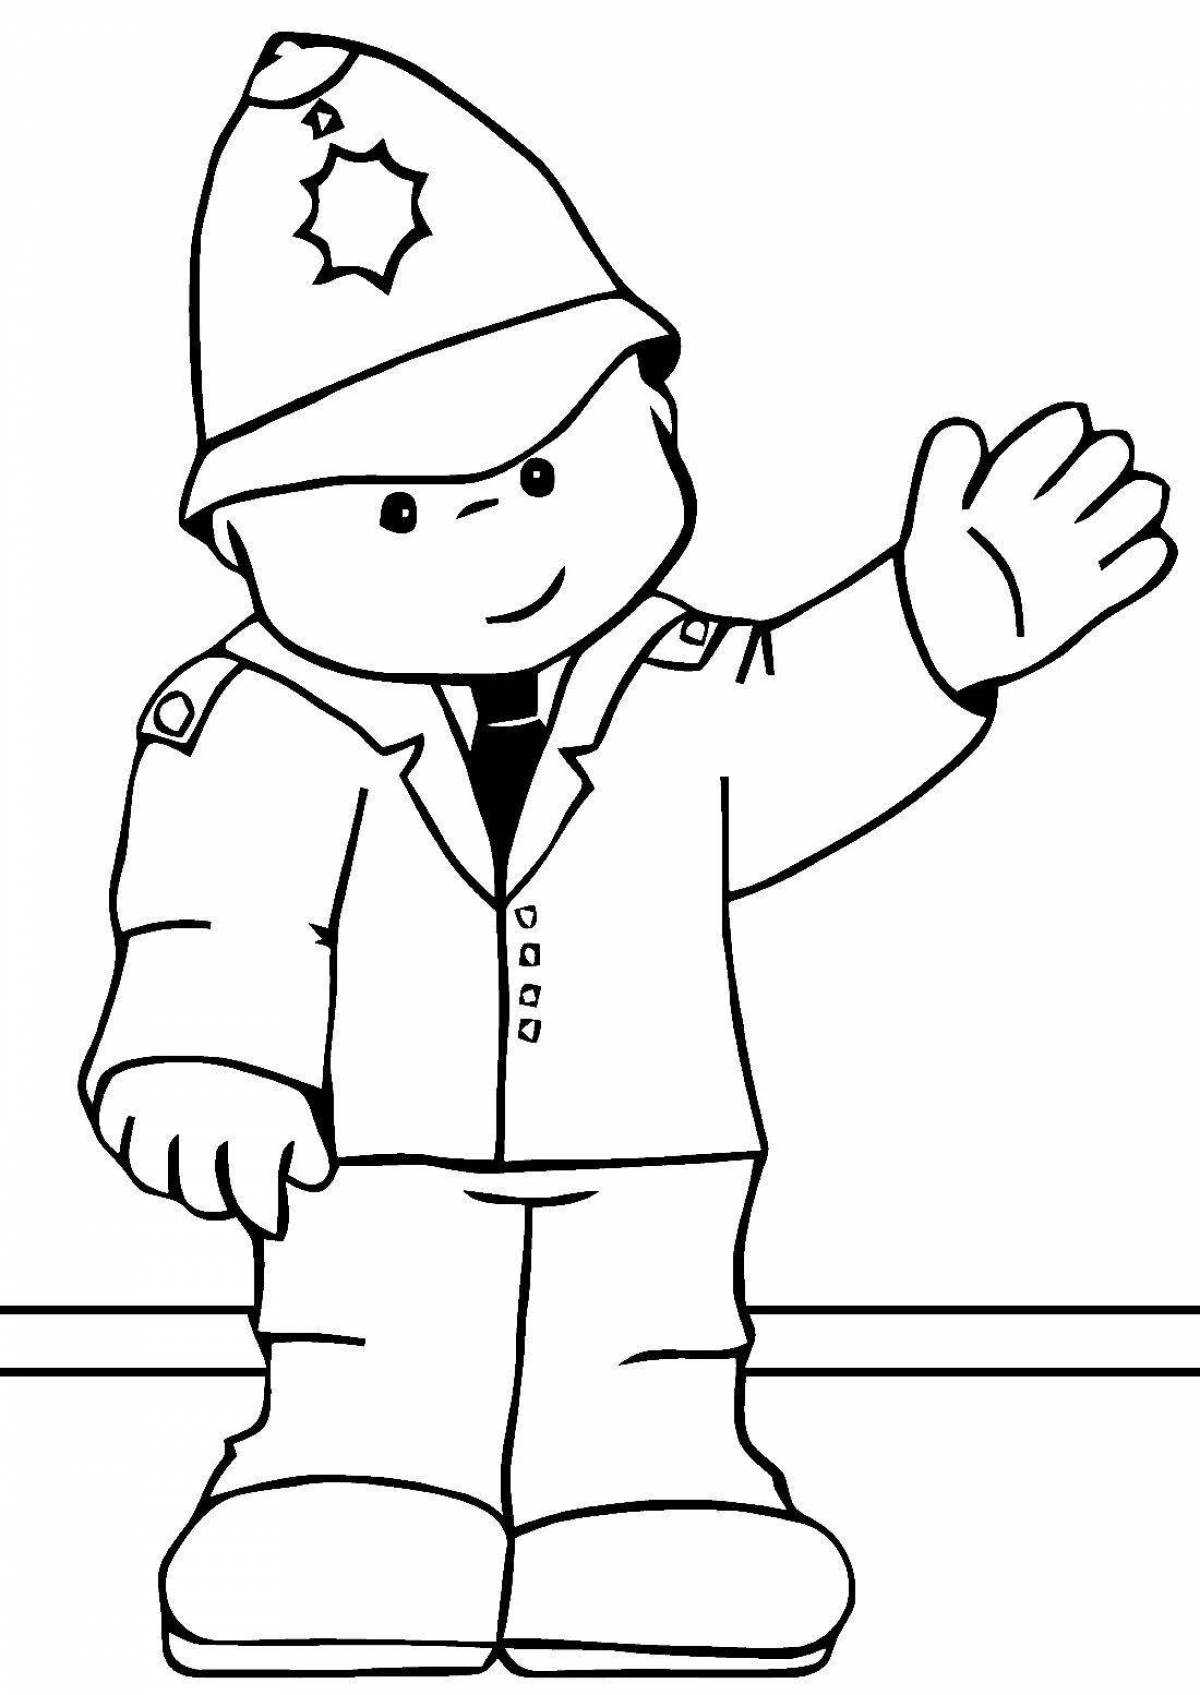 Children's police coloring book